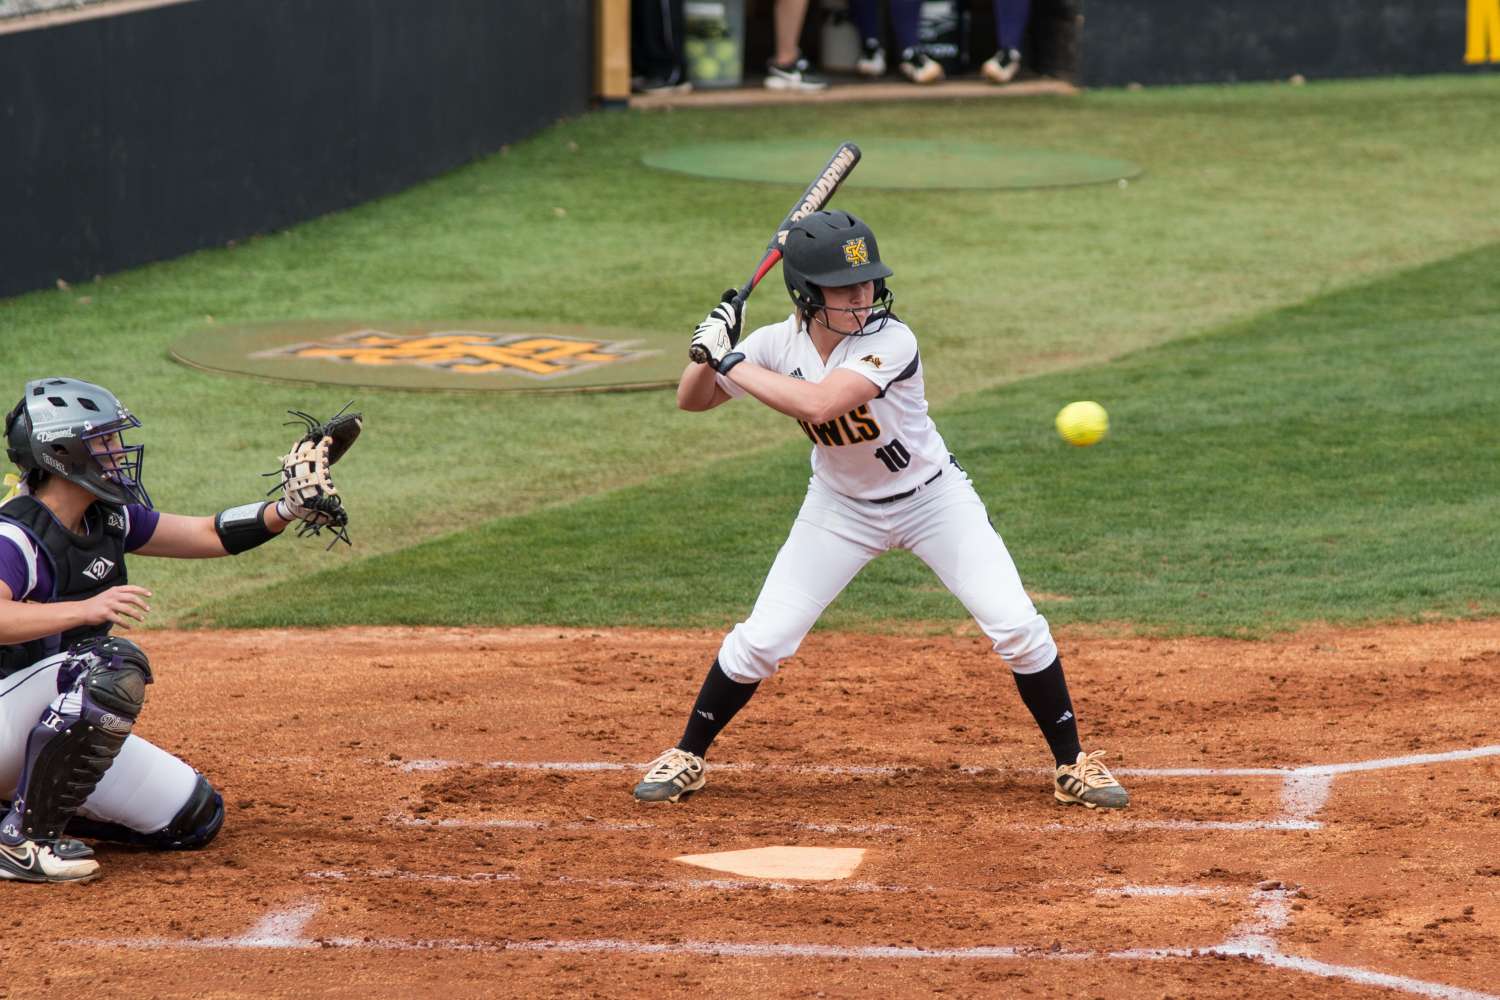 Owls bats freeze in loss to in-state rival